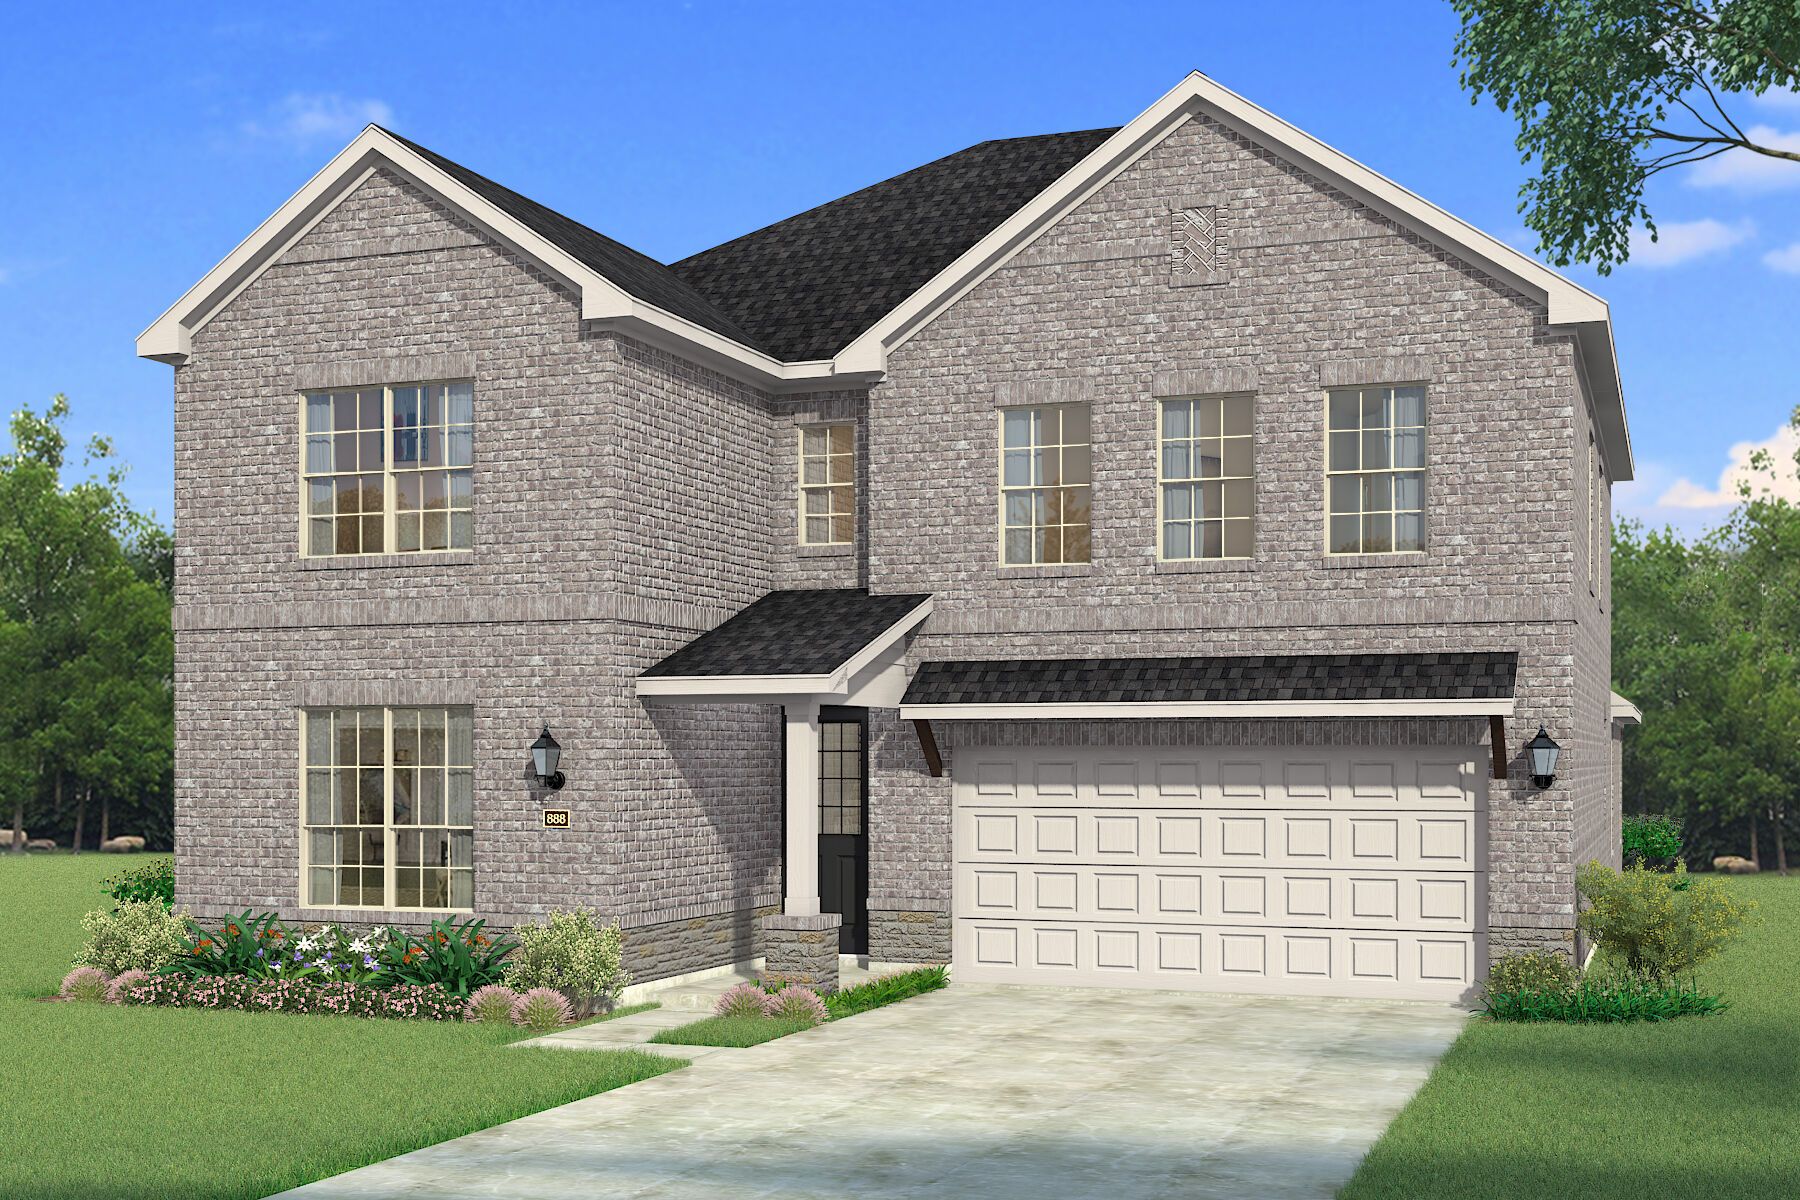 Exterior:The Tiana - Traditional 2 with Stone Elevation